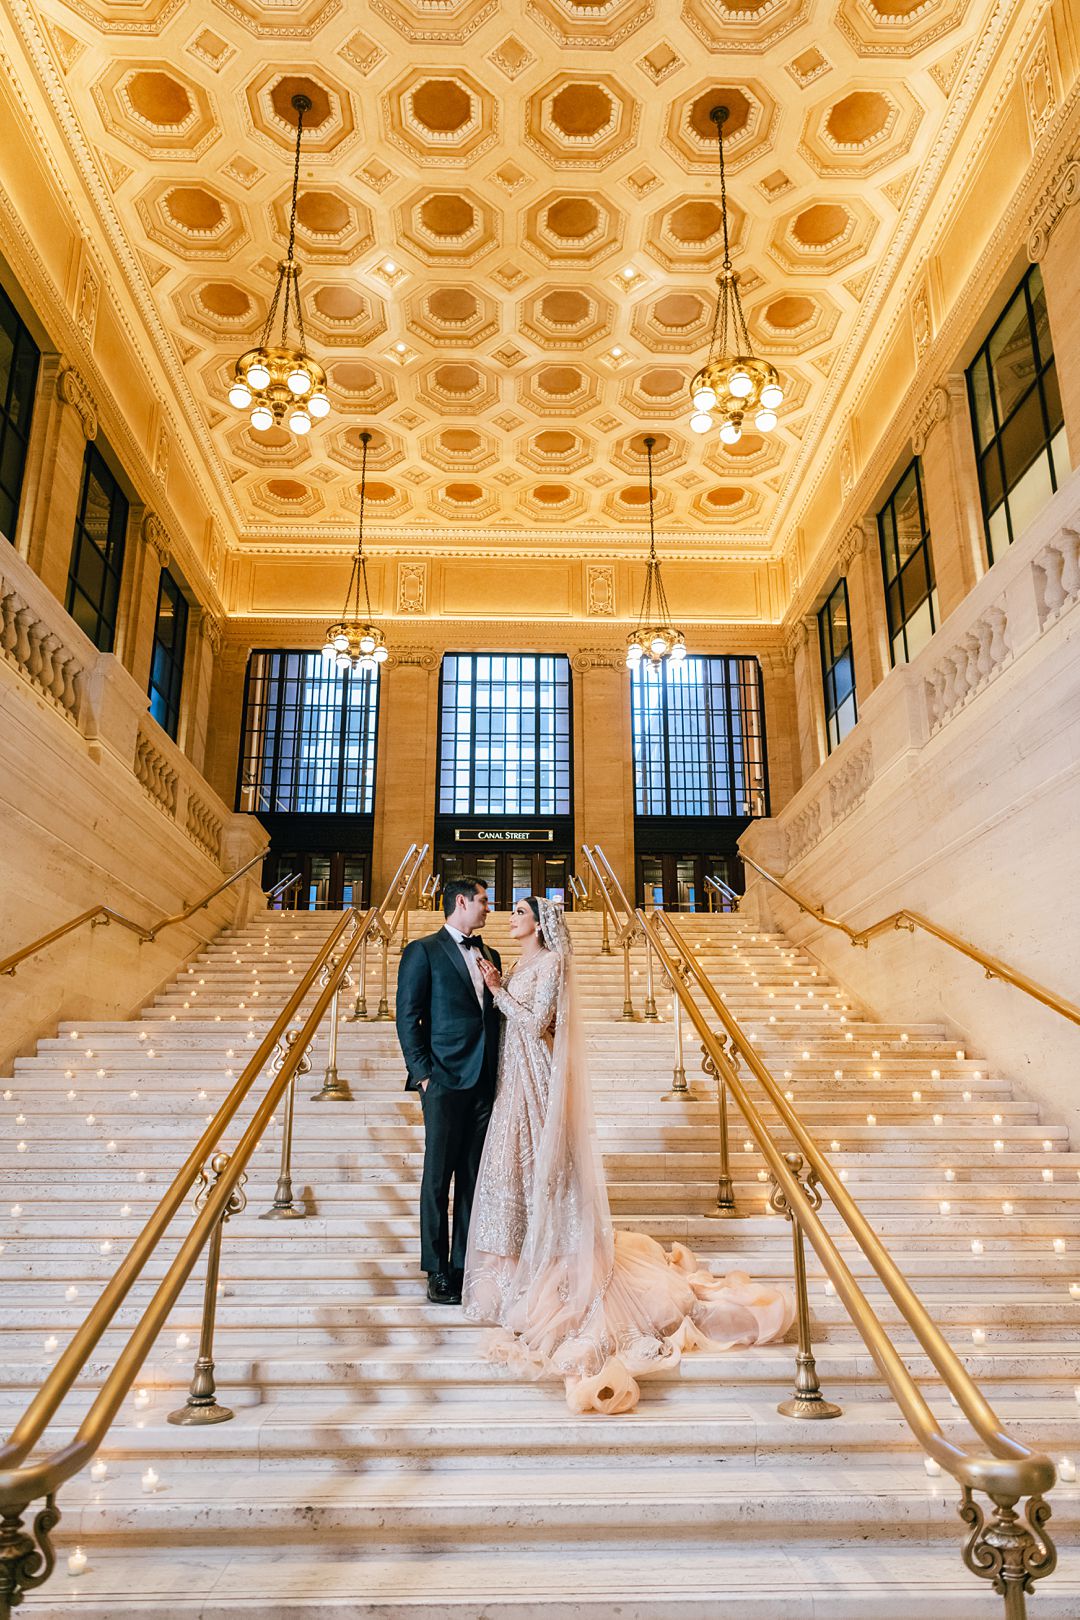 Chicago Union Station Wedding Photography on Grand Staircase by Maha Studios